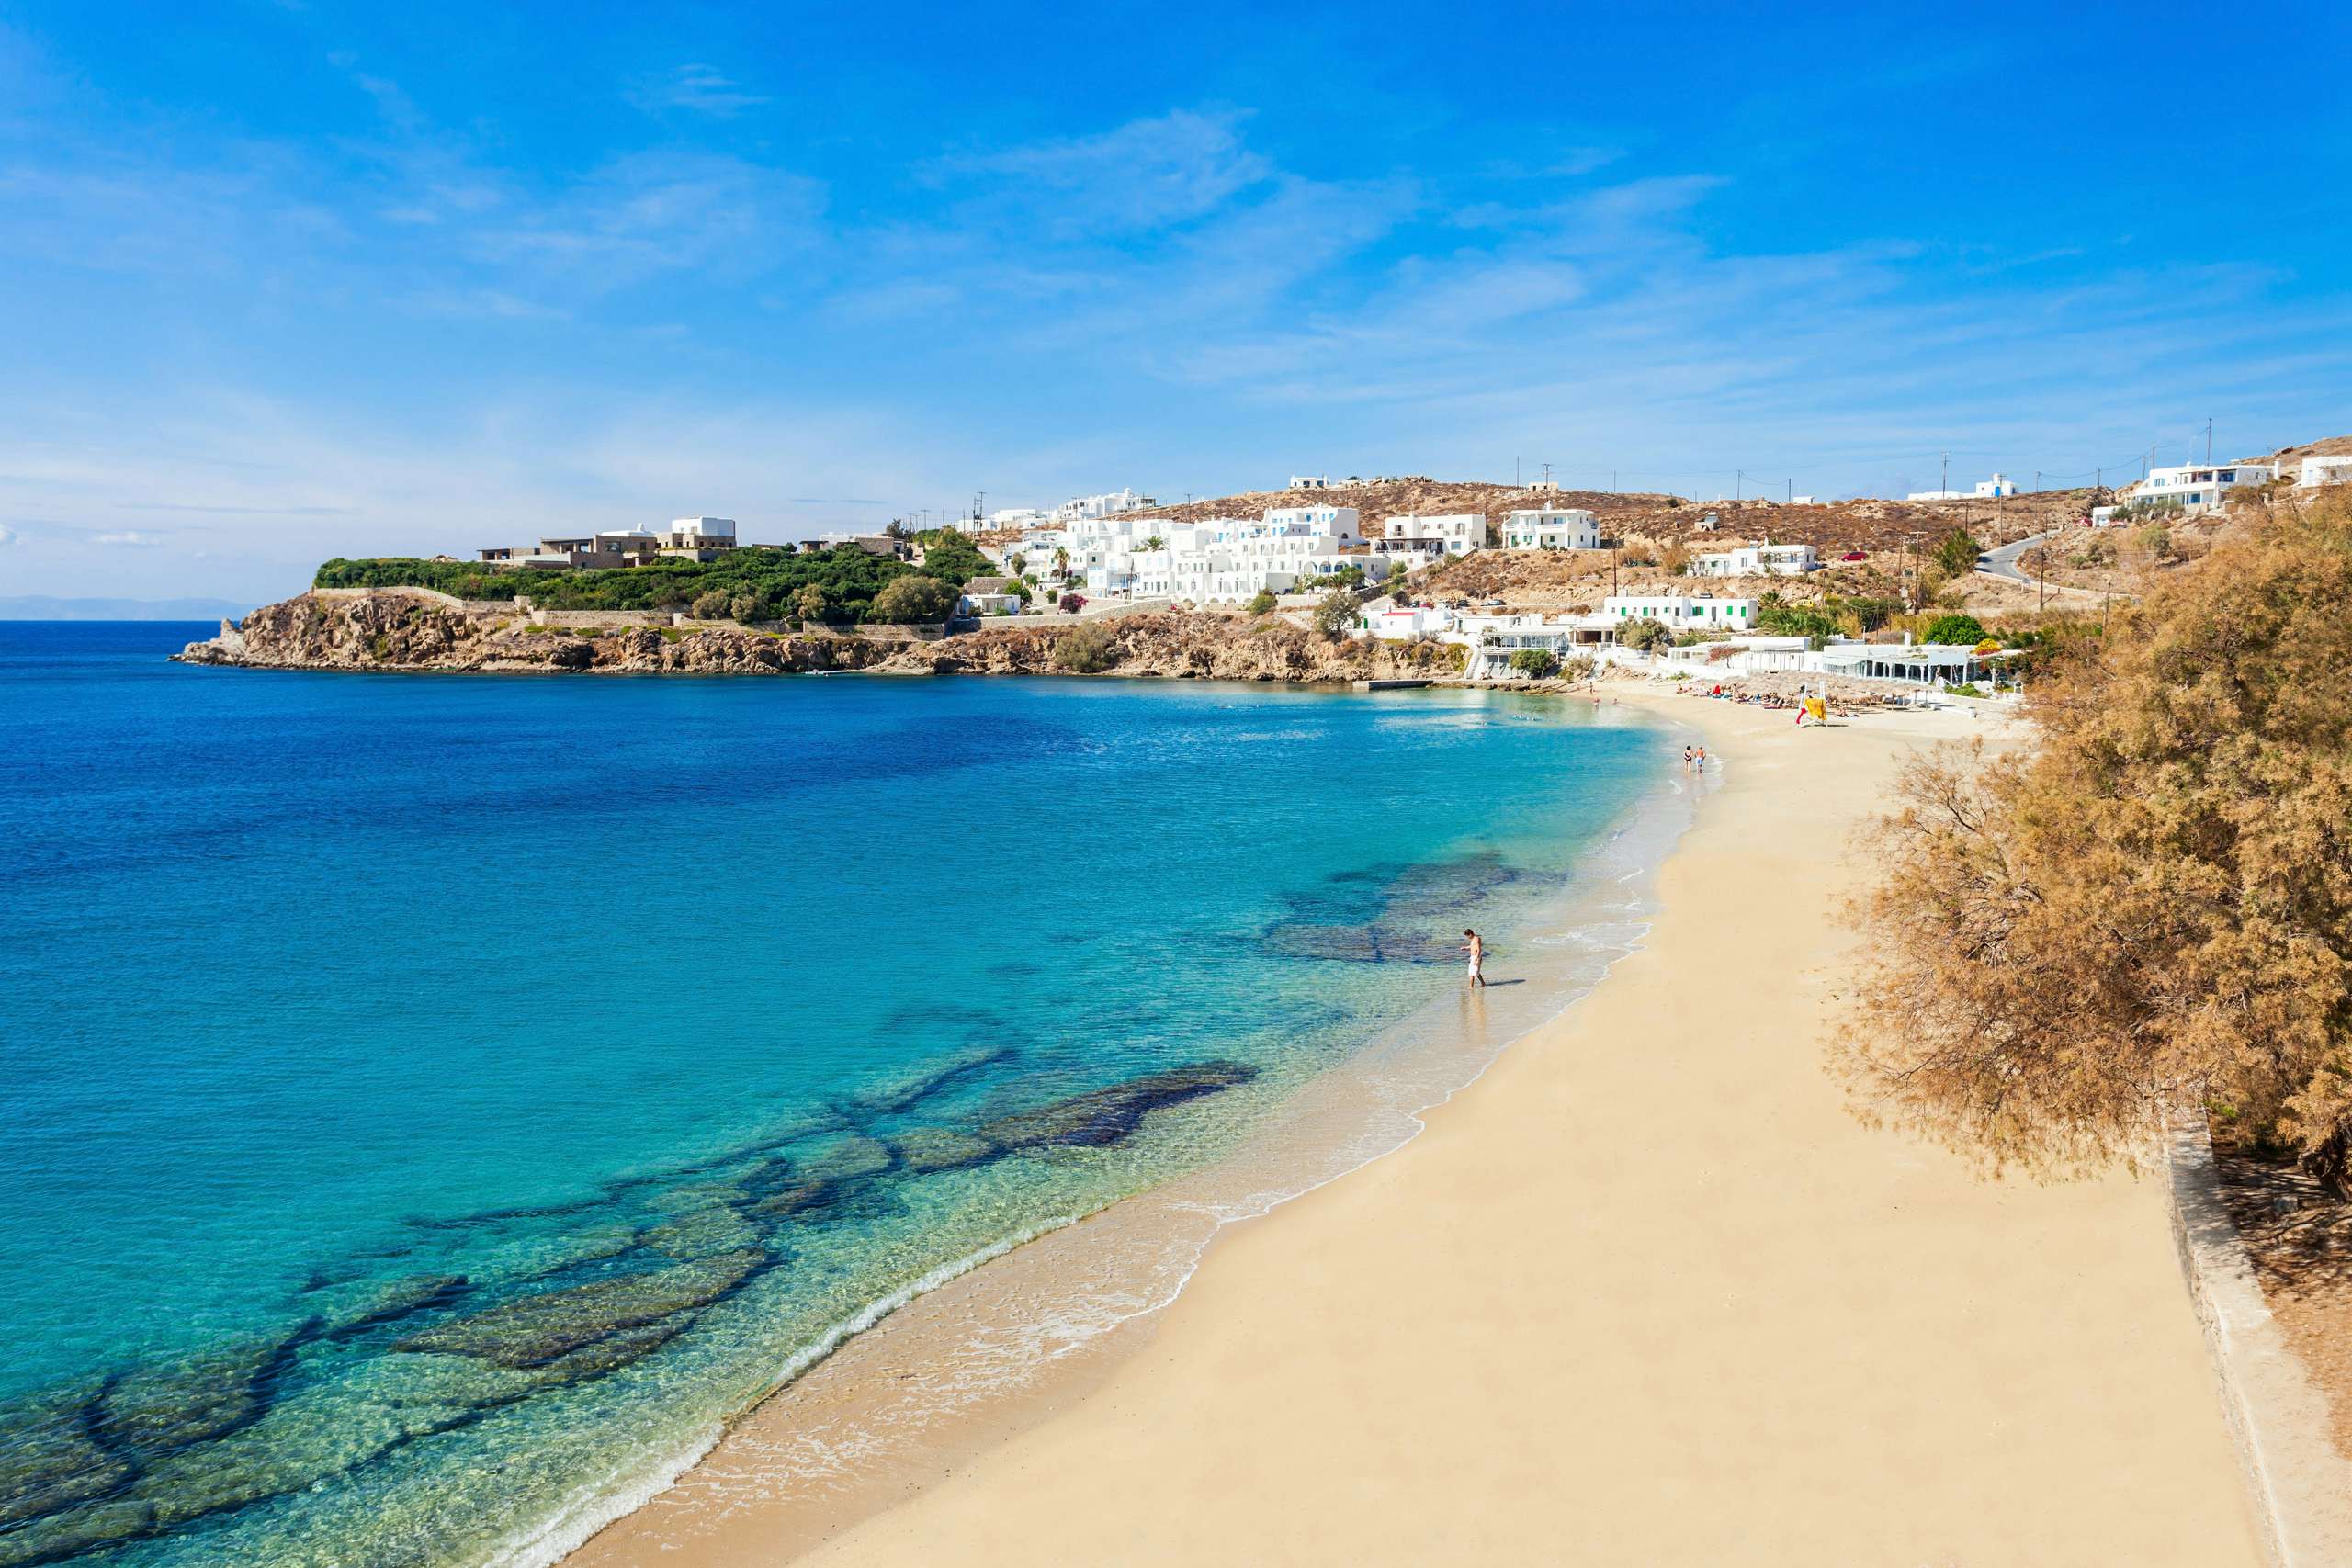 The serene shores of the Dodecanese islands with clear waters and sandy beaches, inviting a peaceful yacht anchorage.